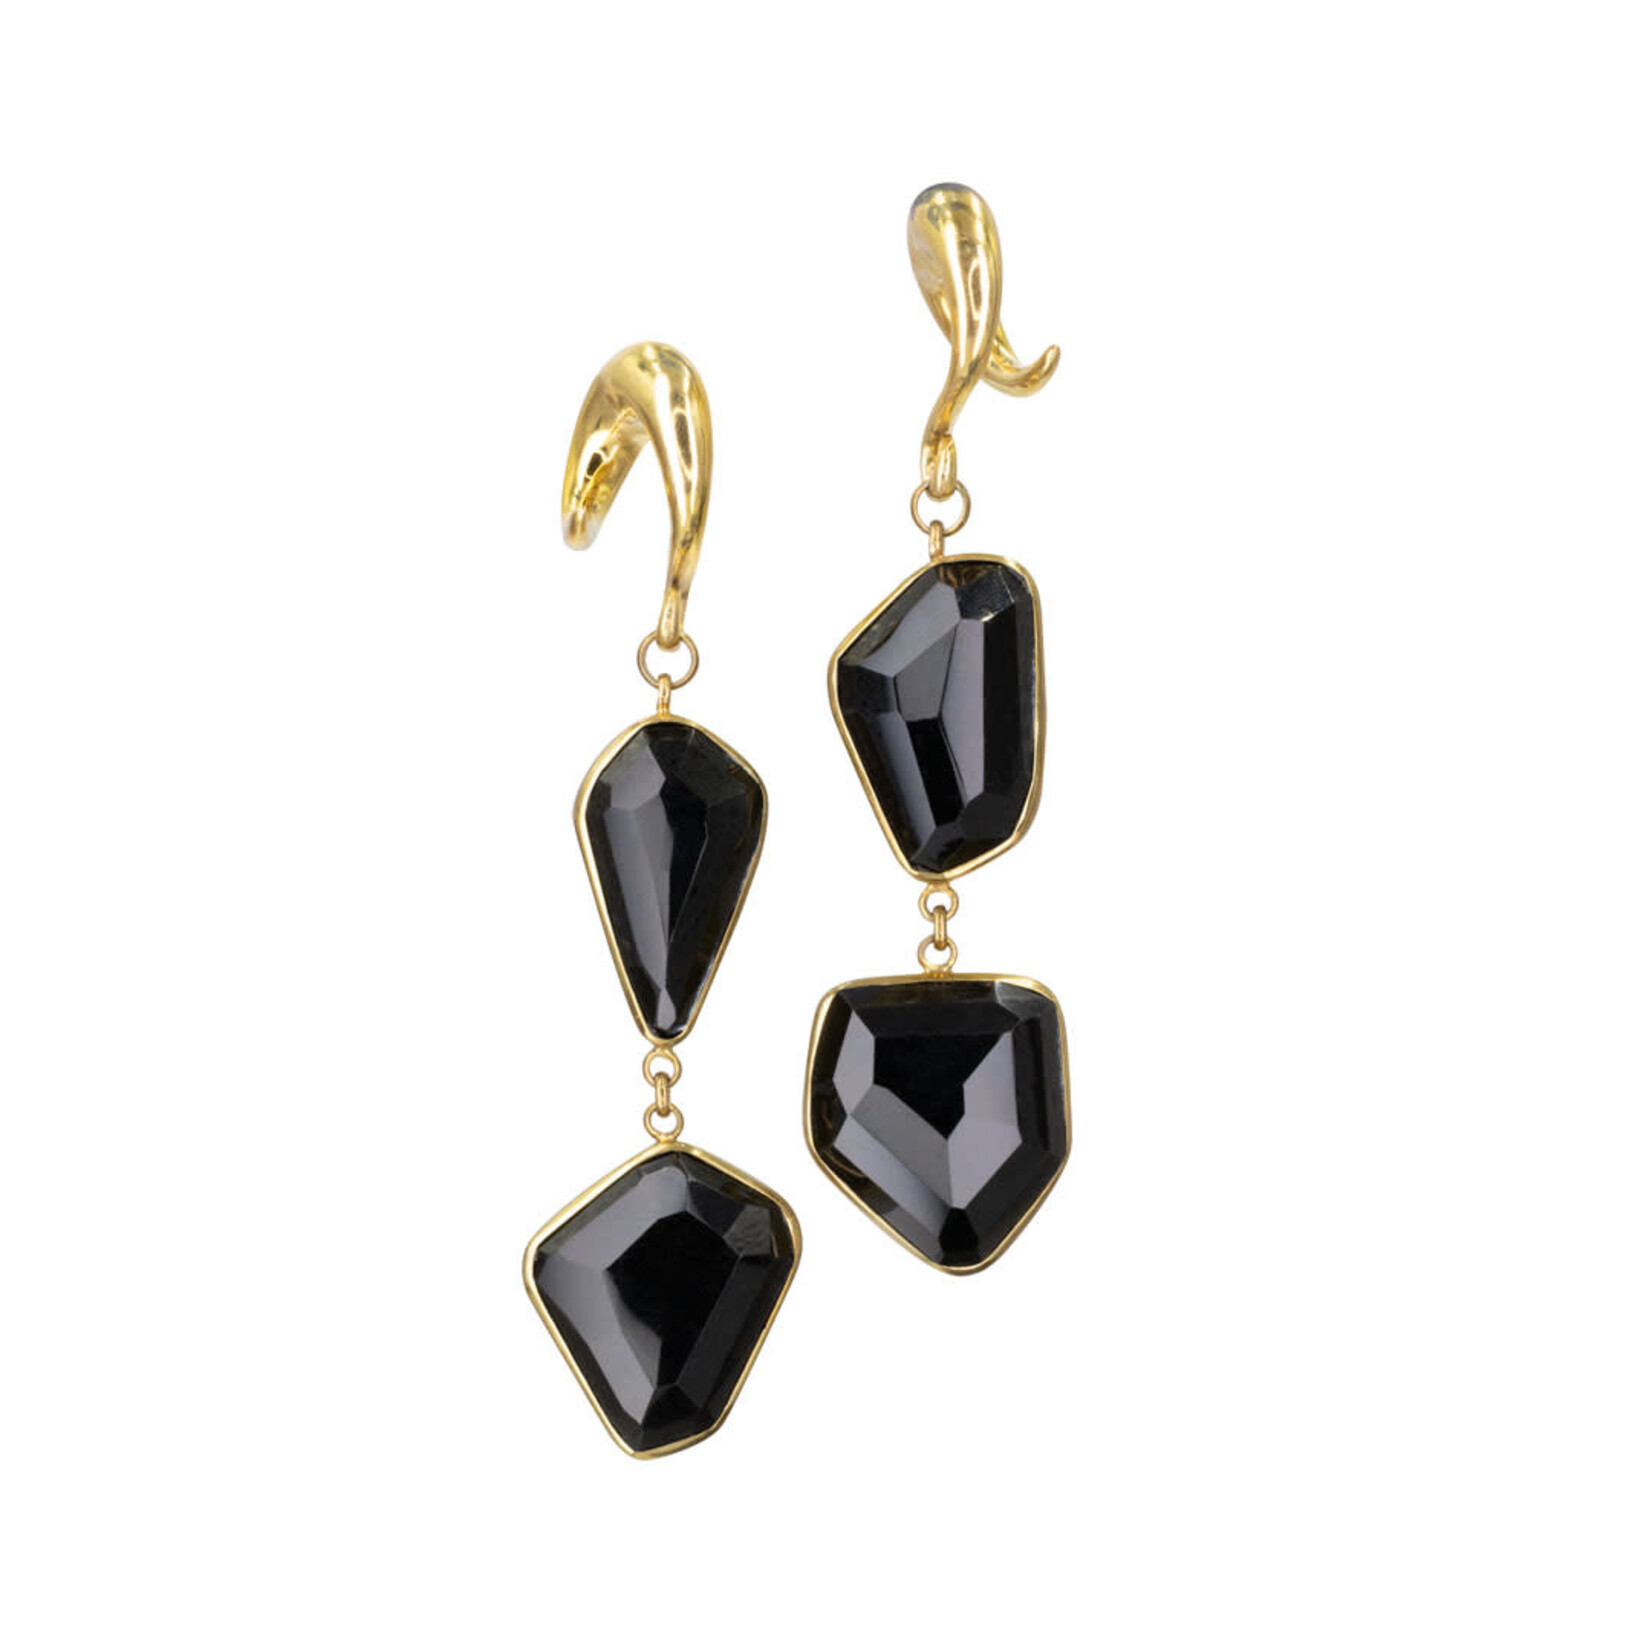 Diablo Organics Diablo Organics Free-Form brass hanging design with faceted onyx on large classic coil